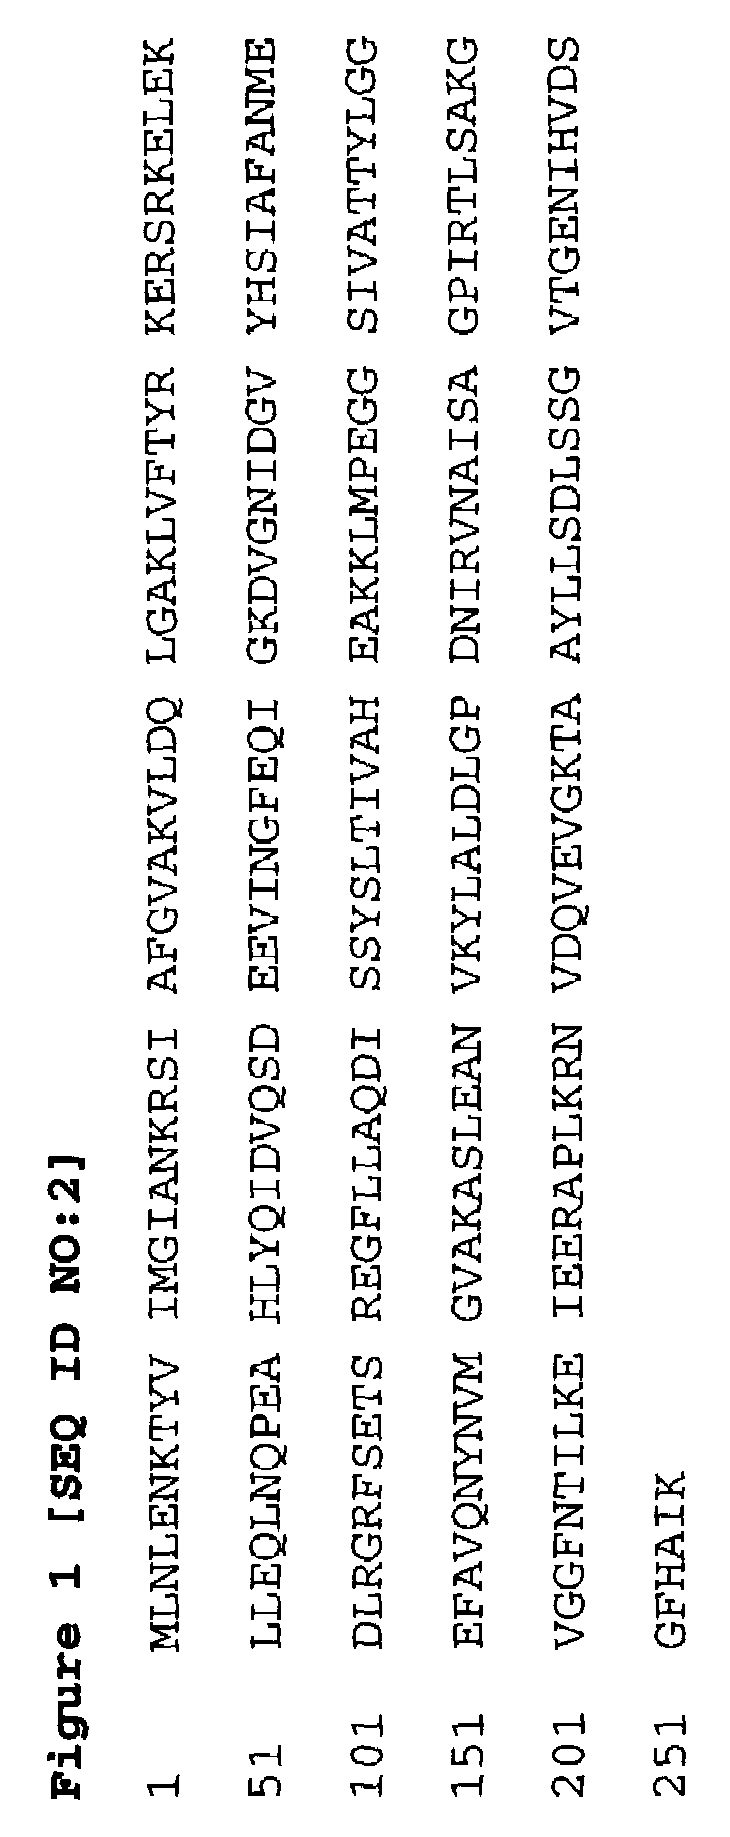 Polynucleotide encoding the enoyl-acyl carrier protein reductase of <i>Staphylococcus aureus</i>, FAB I